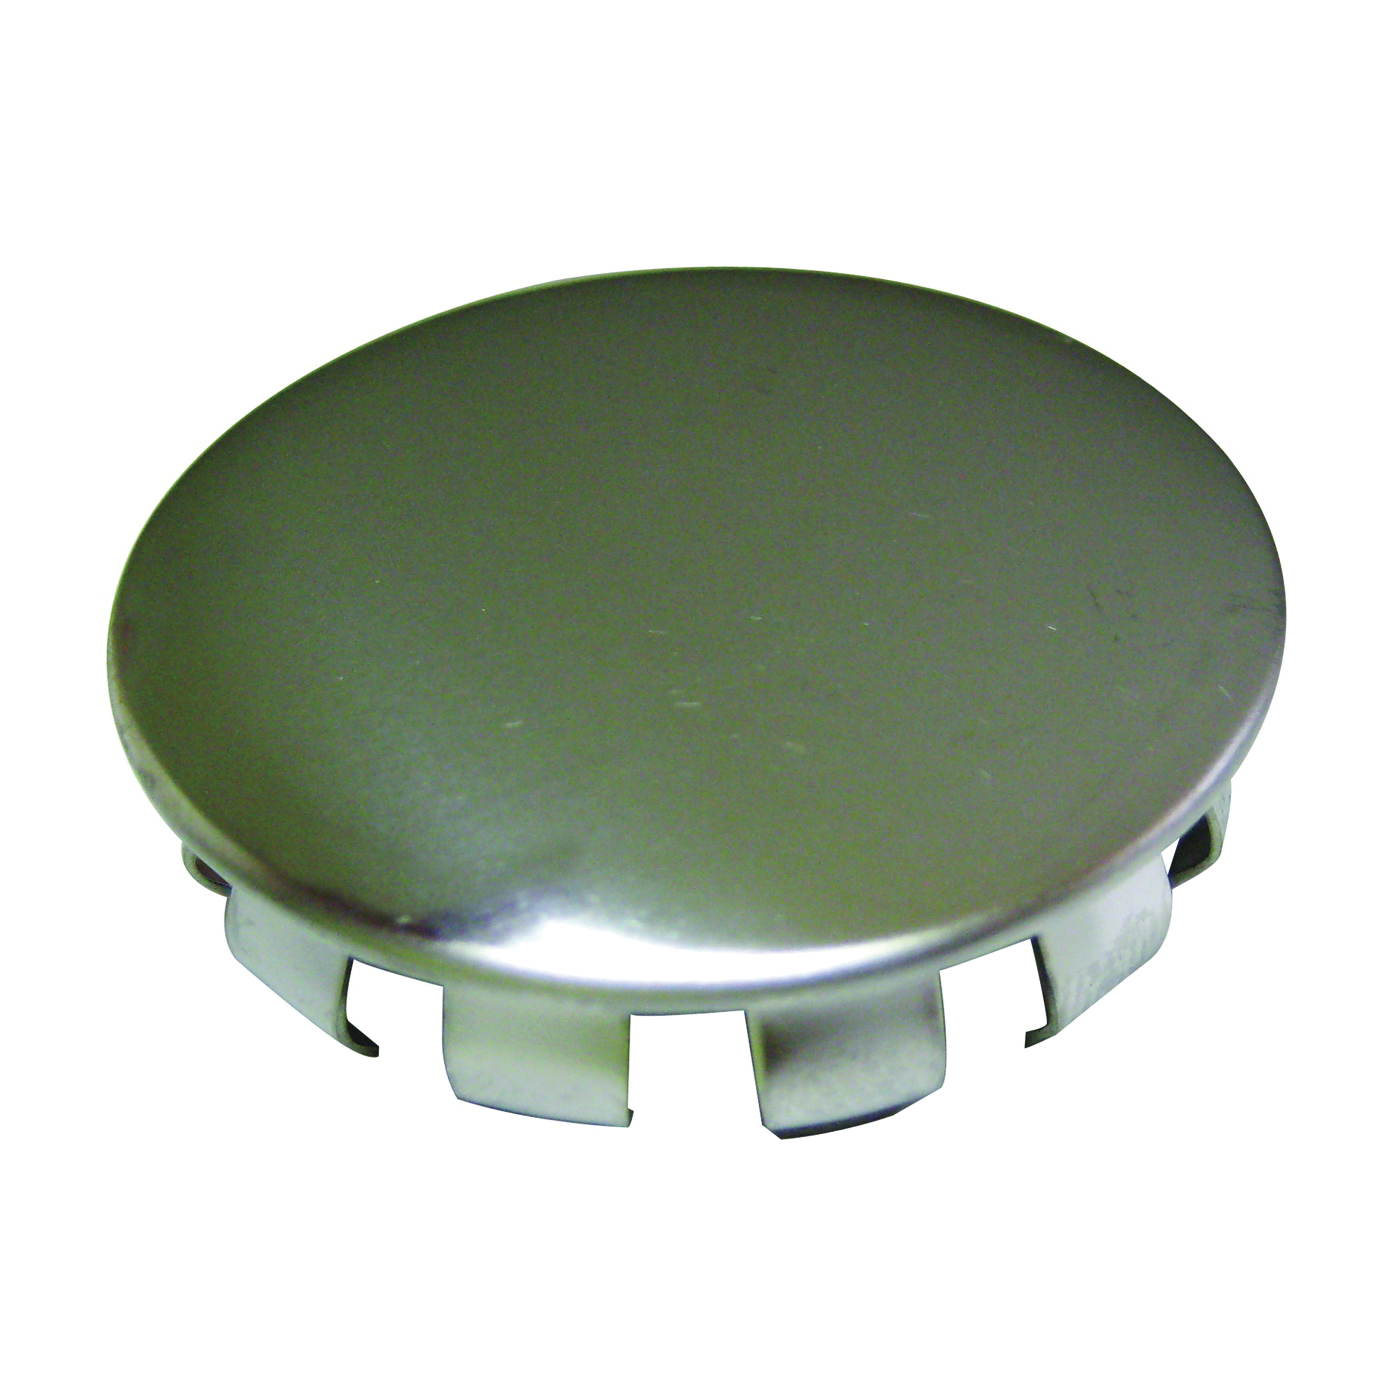 PP815-11 Faucet Hole Cover, Snap-In, Stainless Steel, For: Sink and Faucets